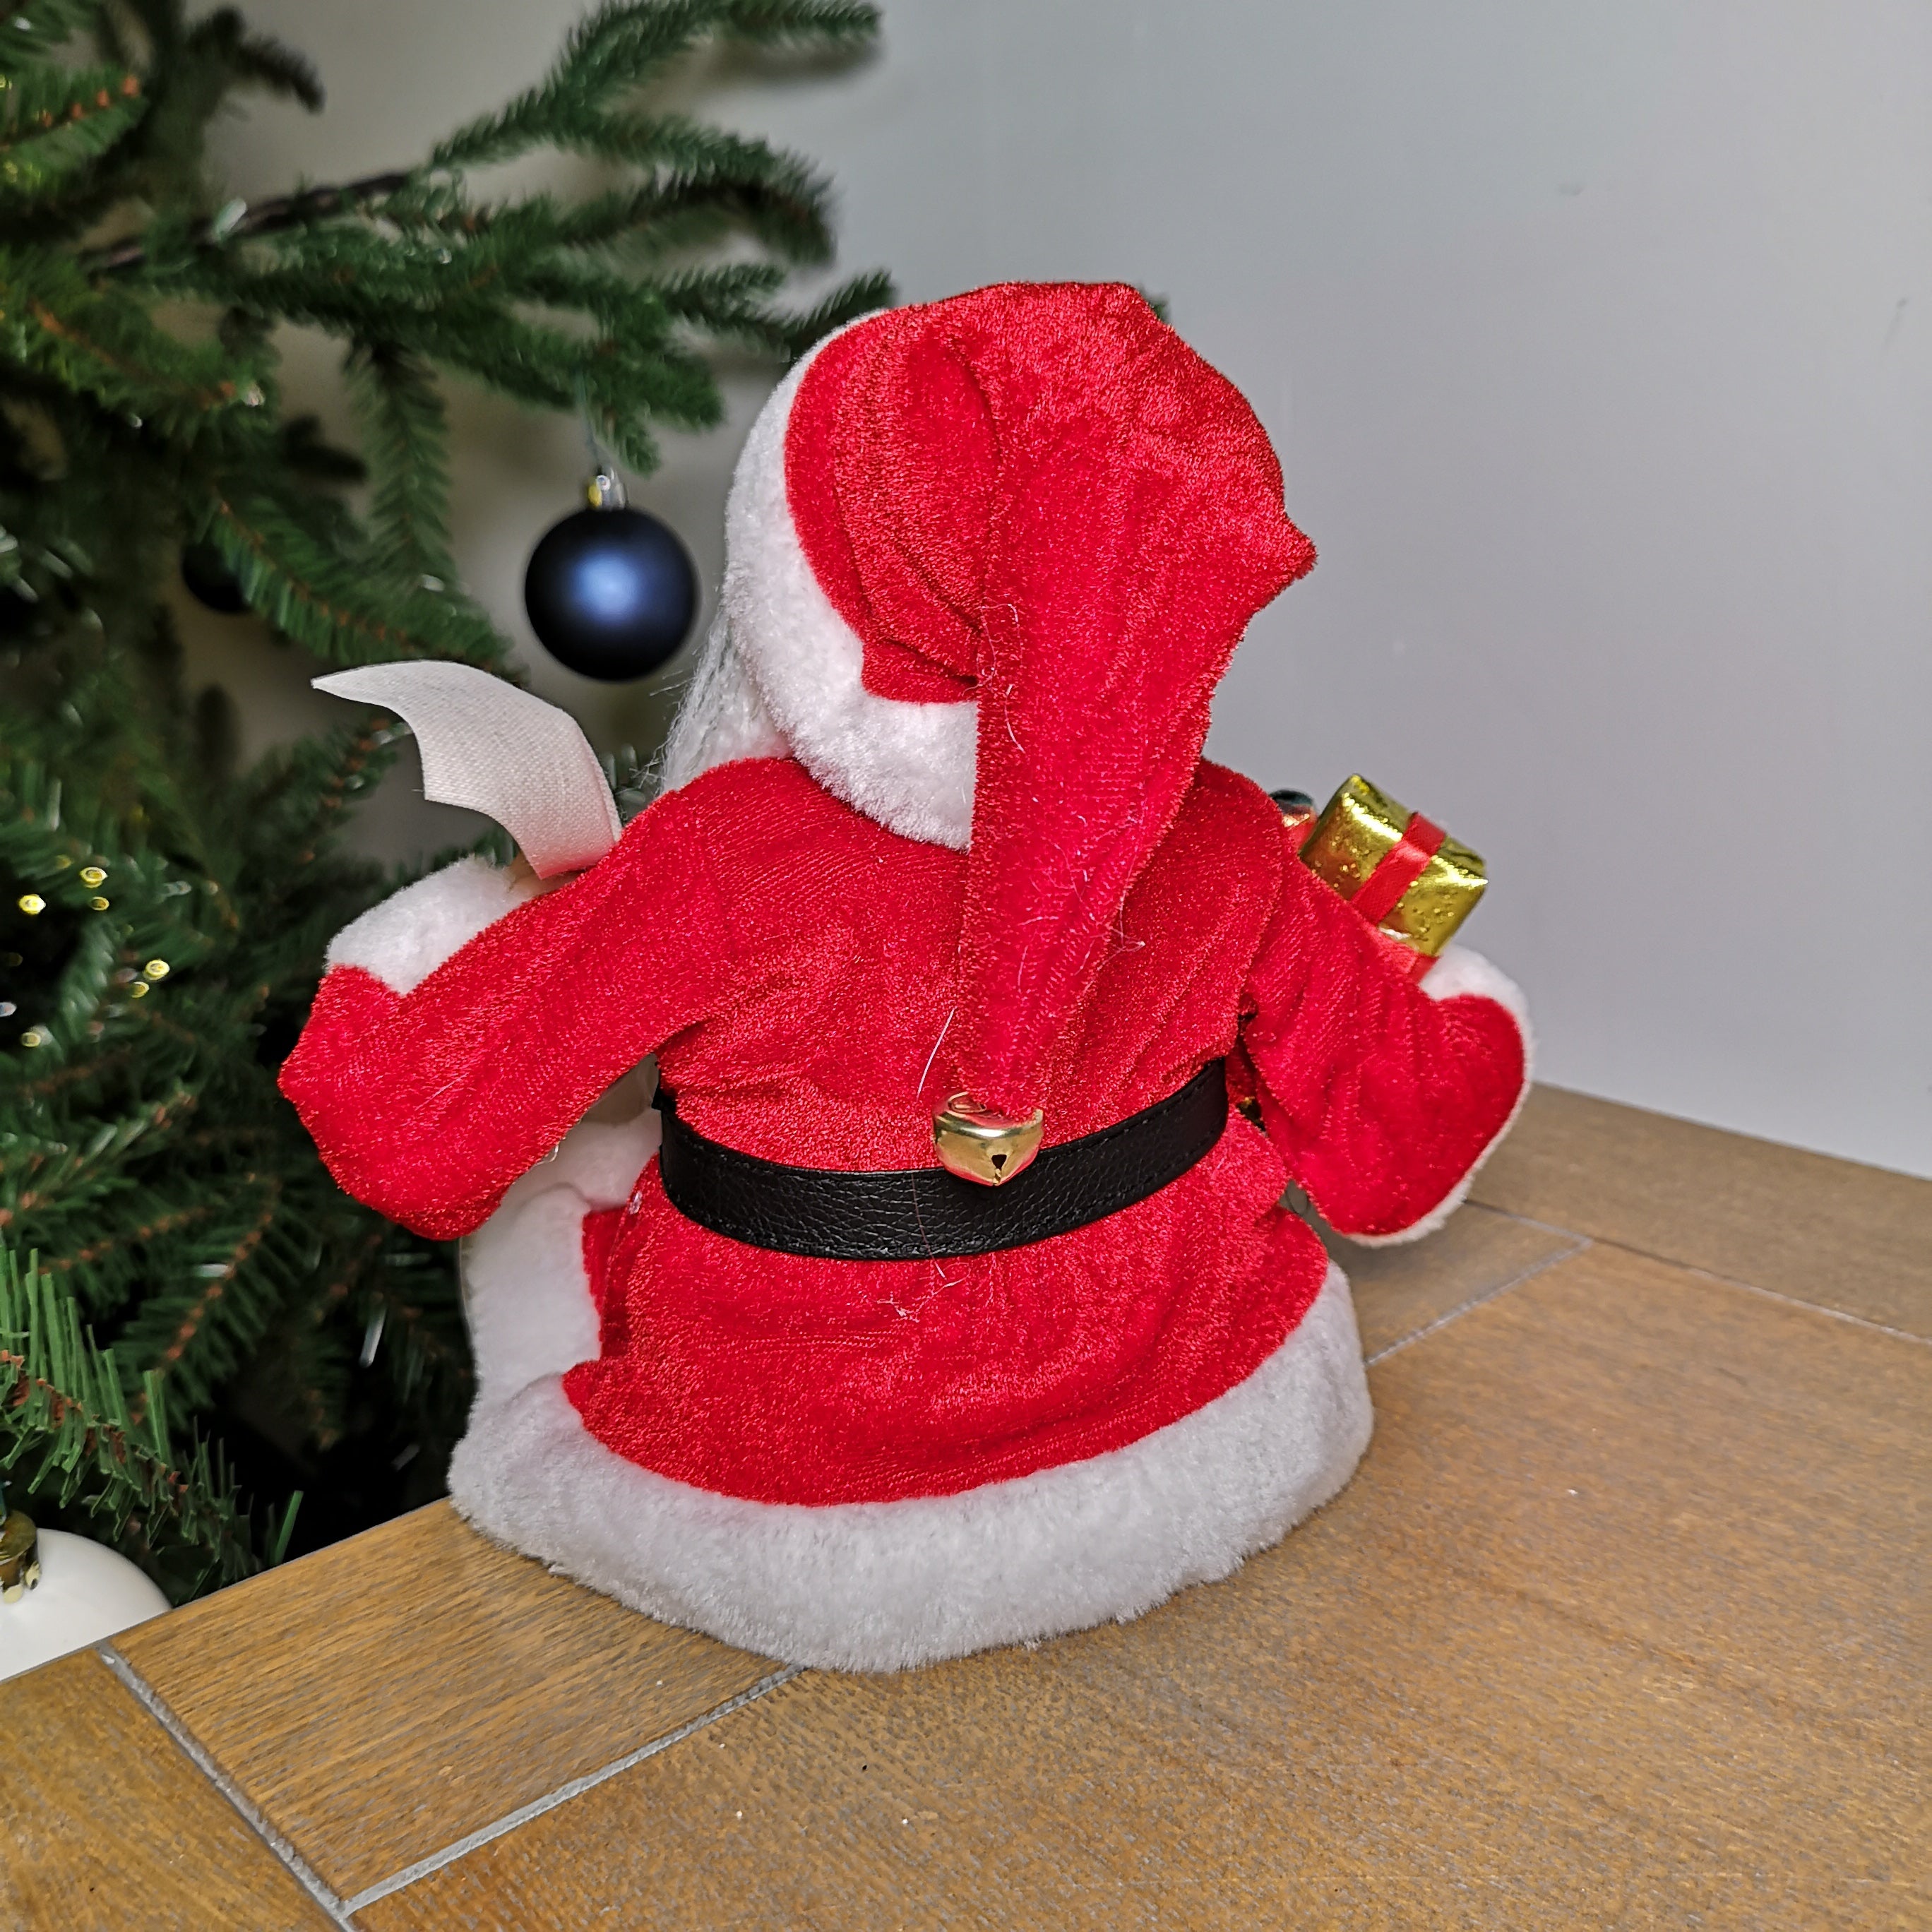 30cm Sitting Santa Father Christmas Decoration Holding Gifts & Name List in Red